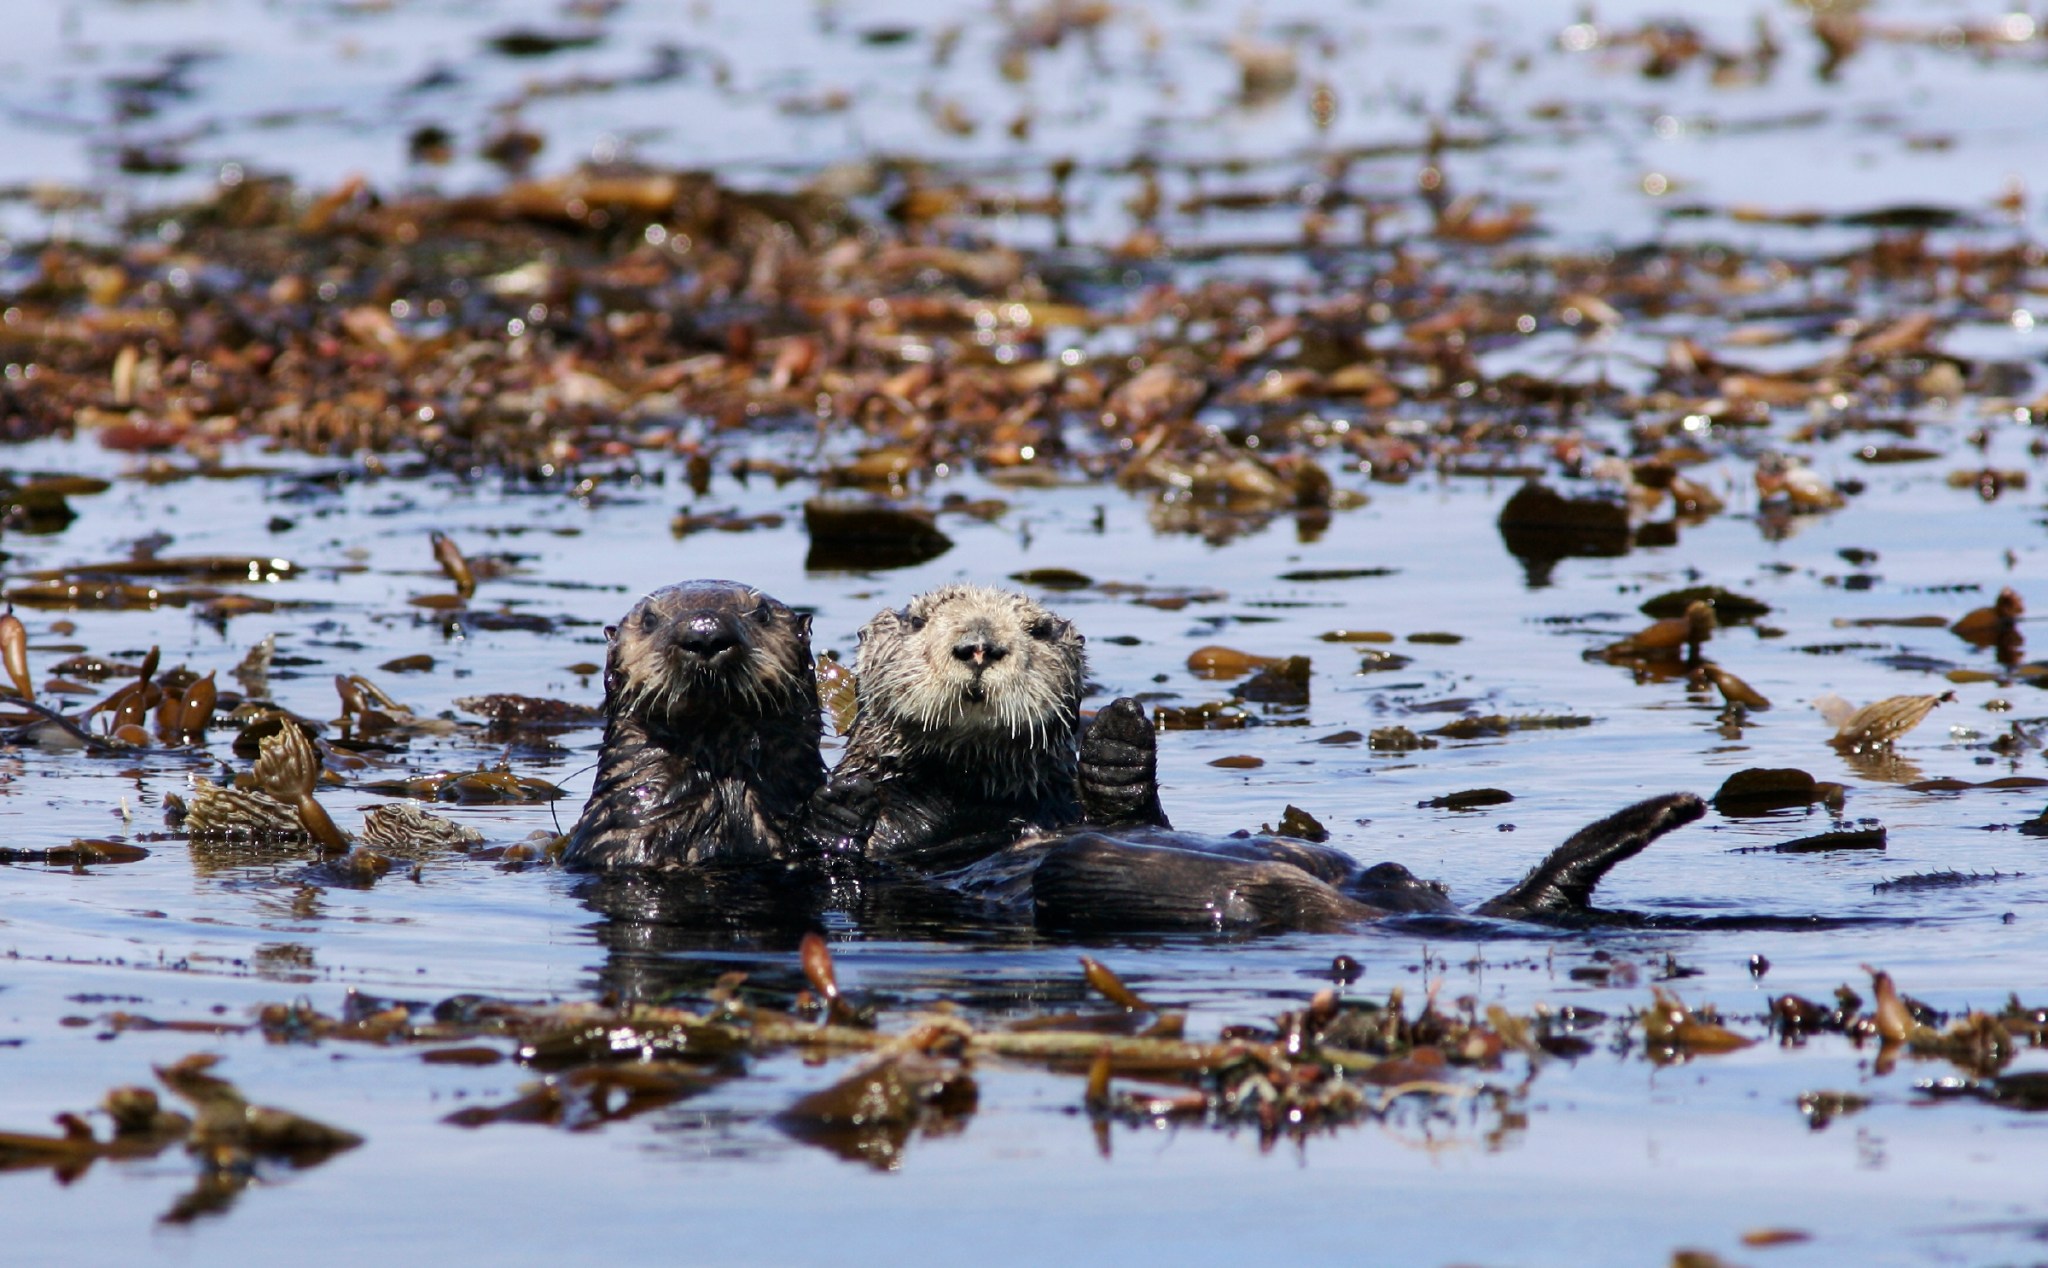 Two sea otters in the water, surrounded by kelp.